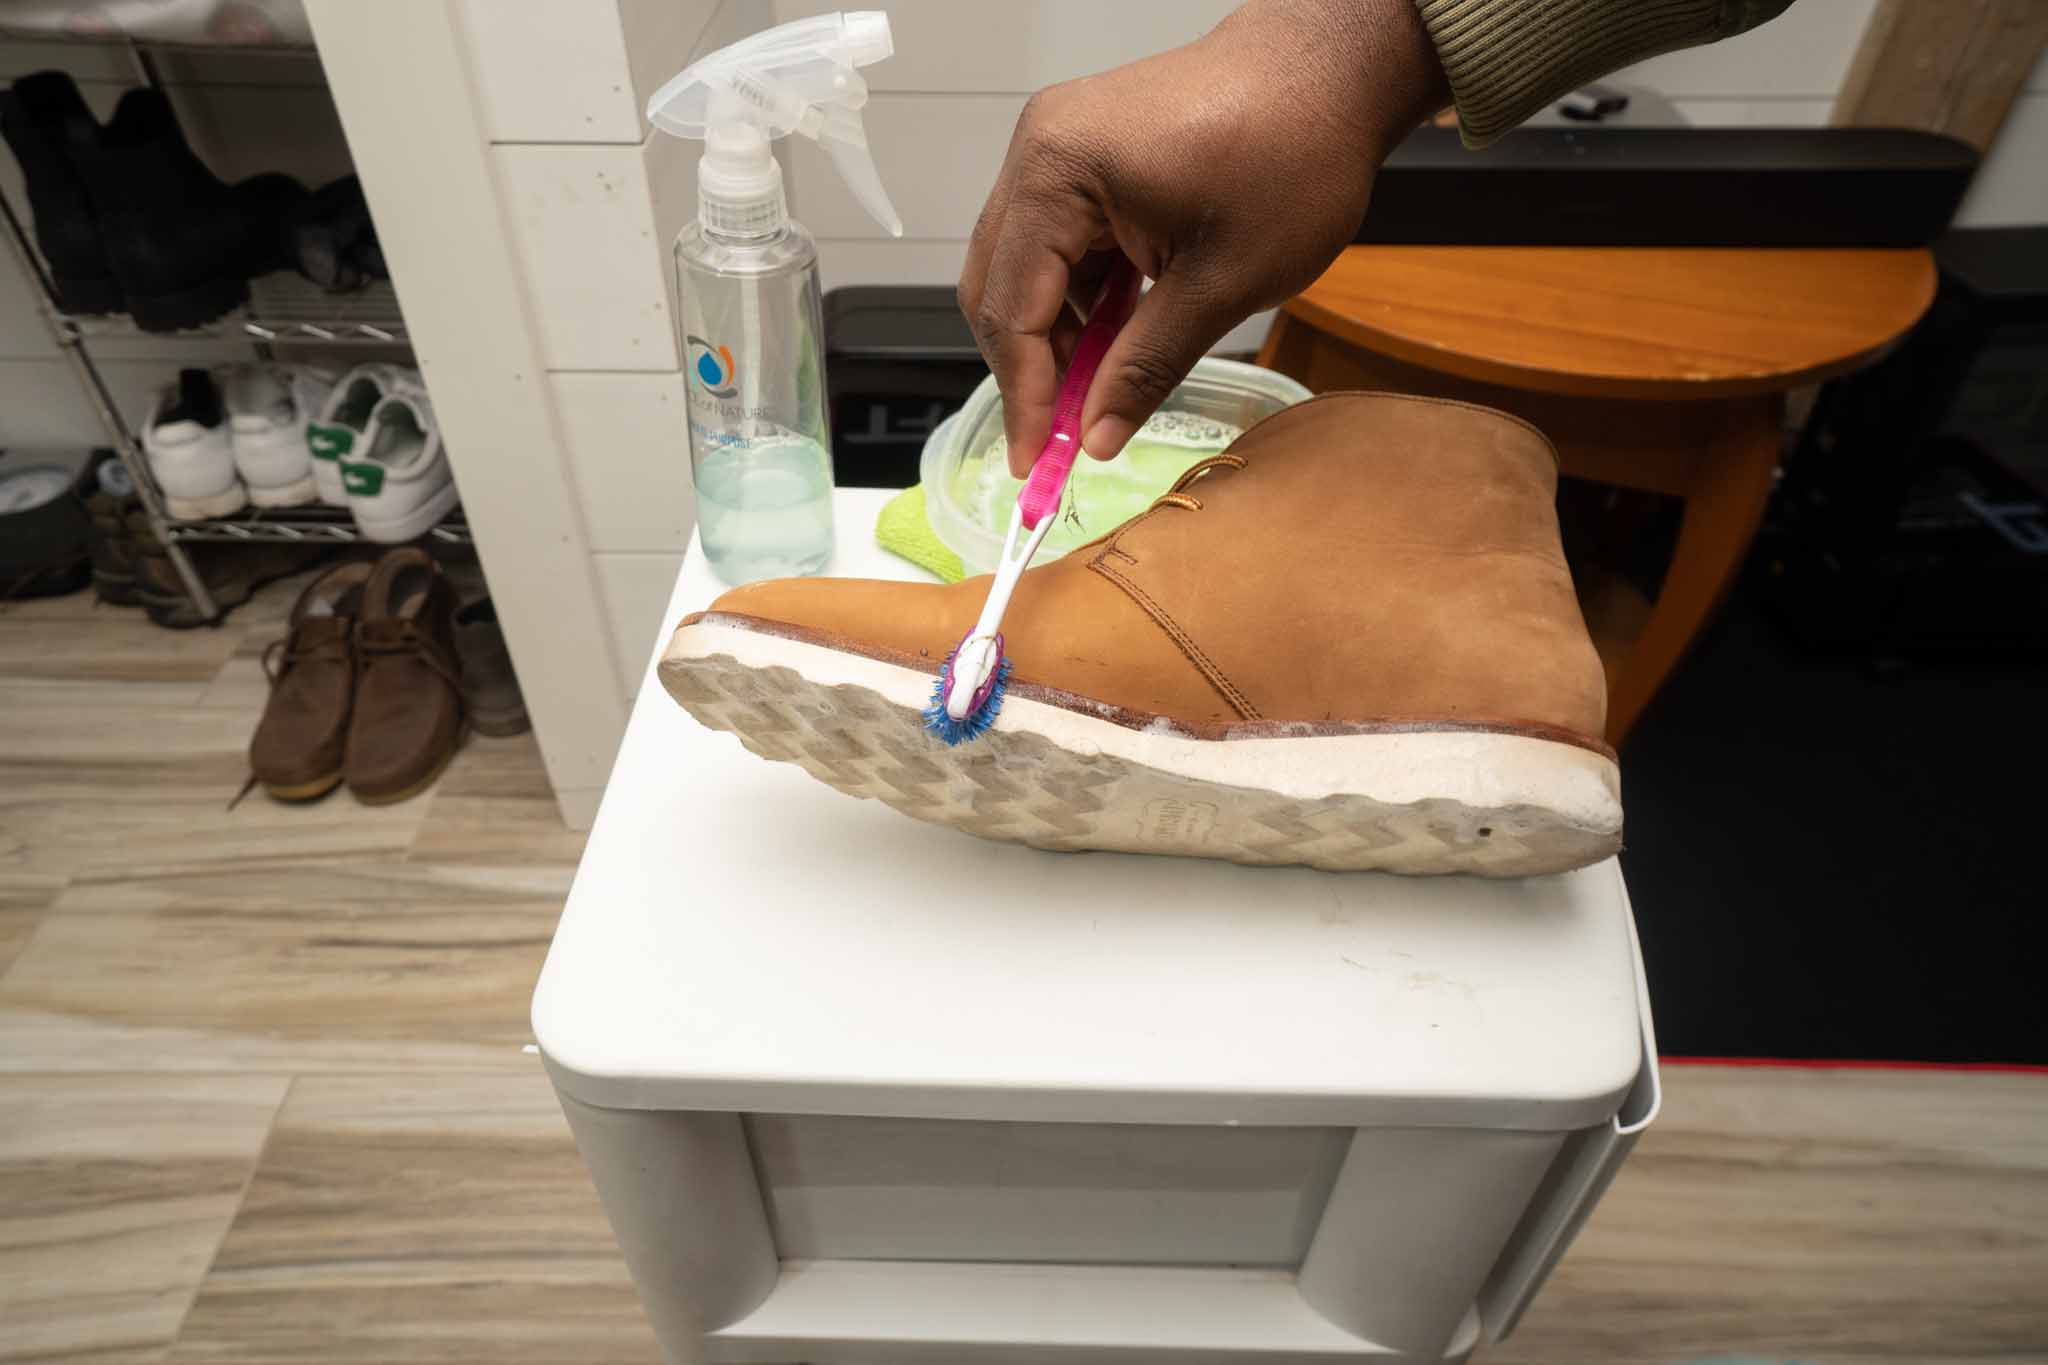 cleaning leather boot sole with toothbrush and dawn dish soap